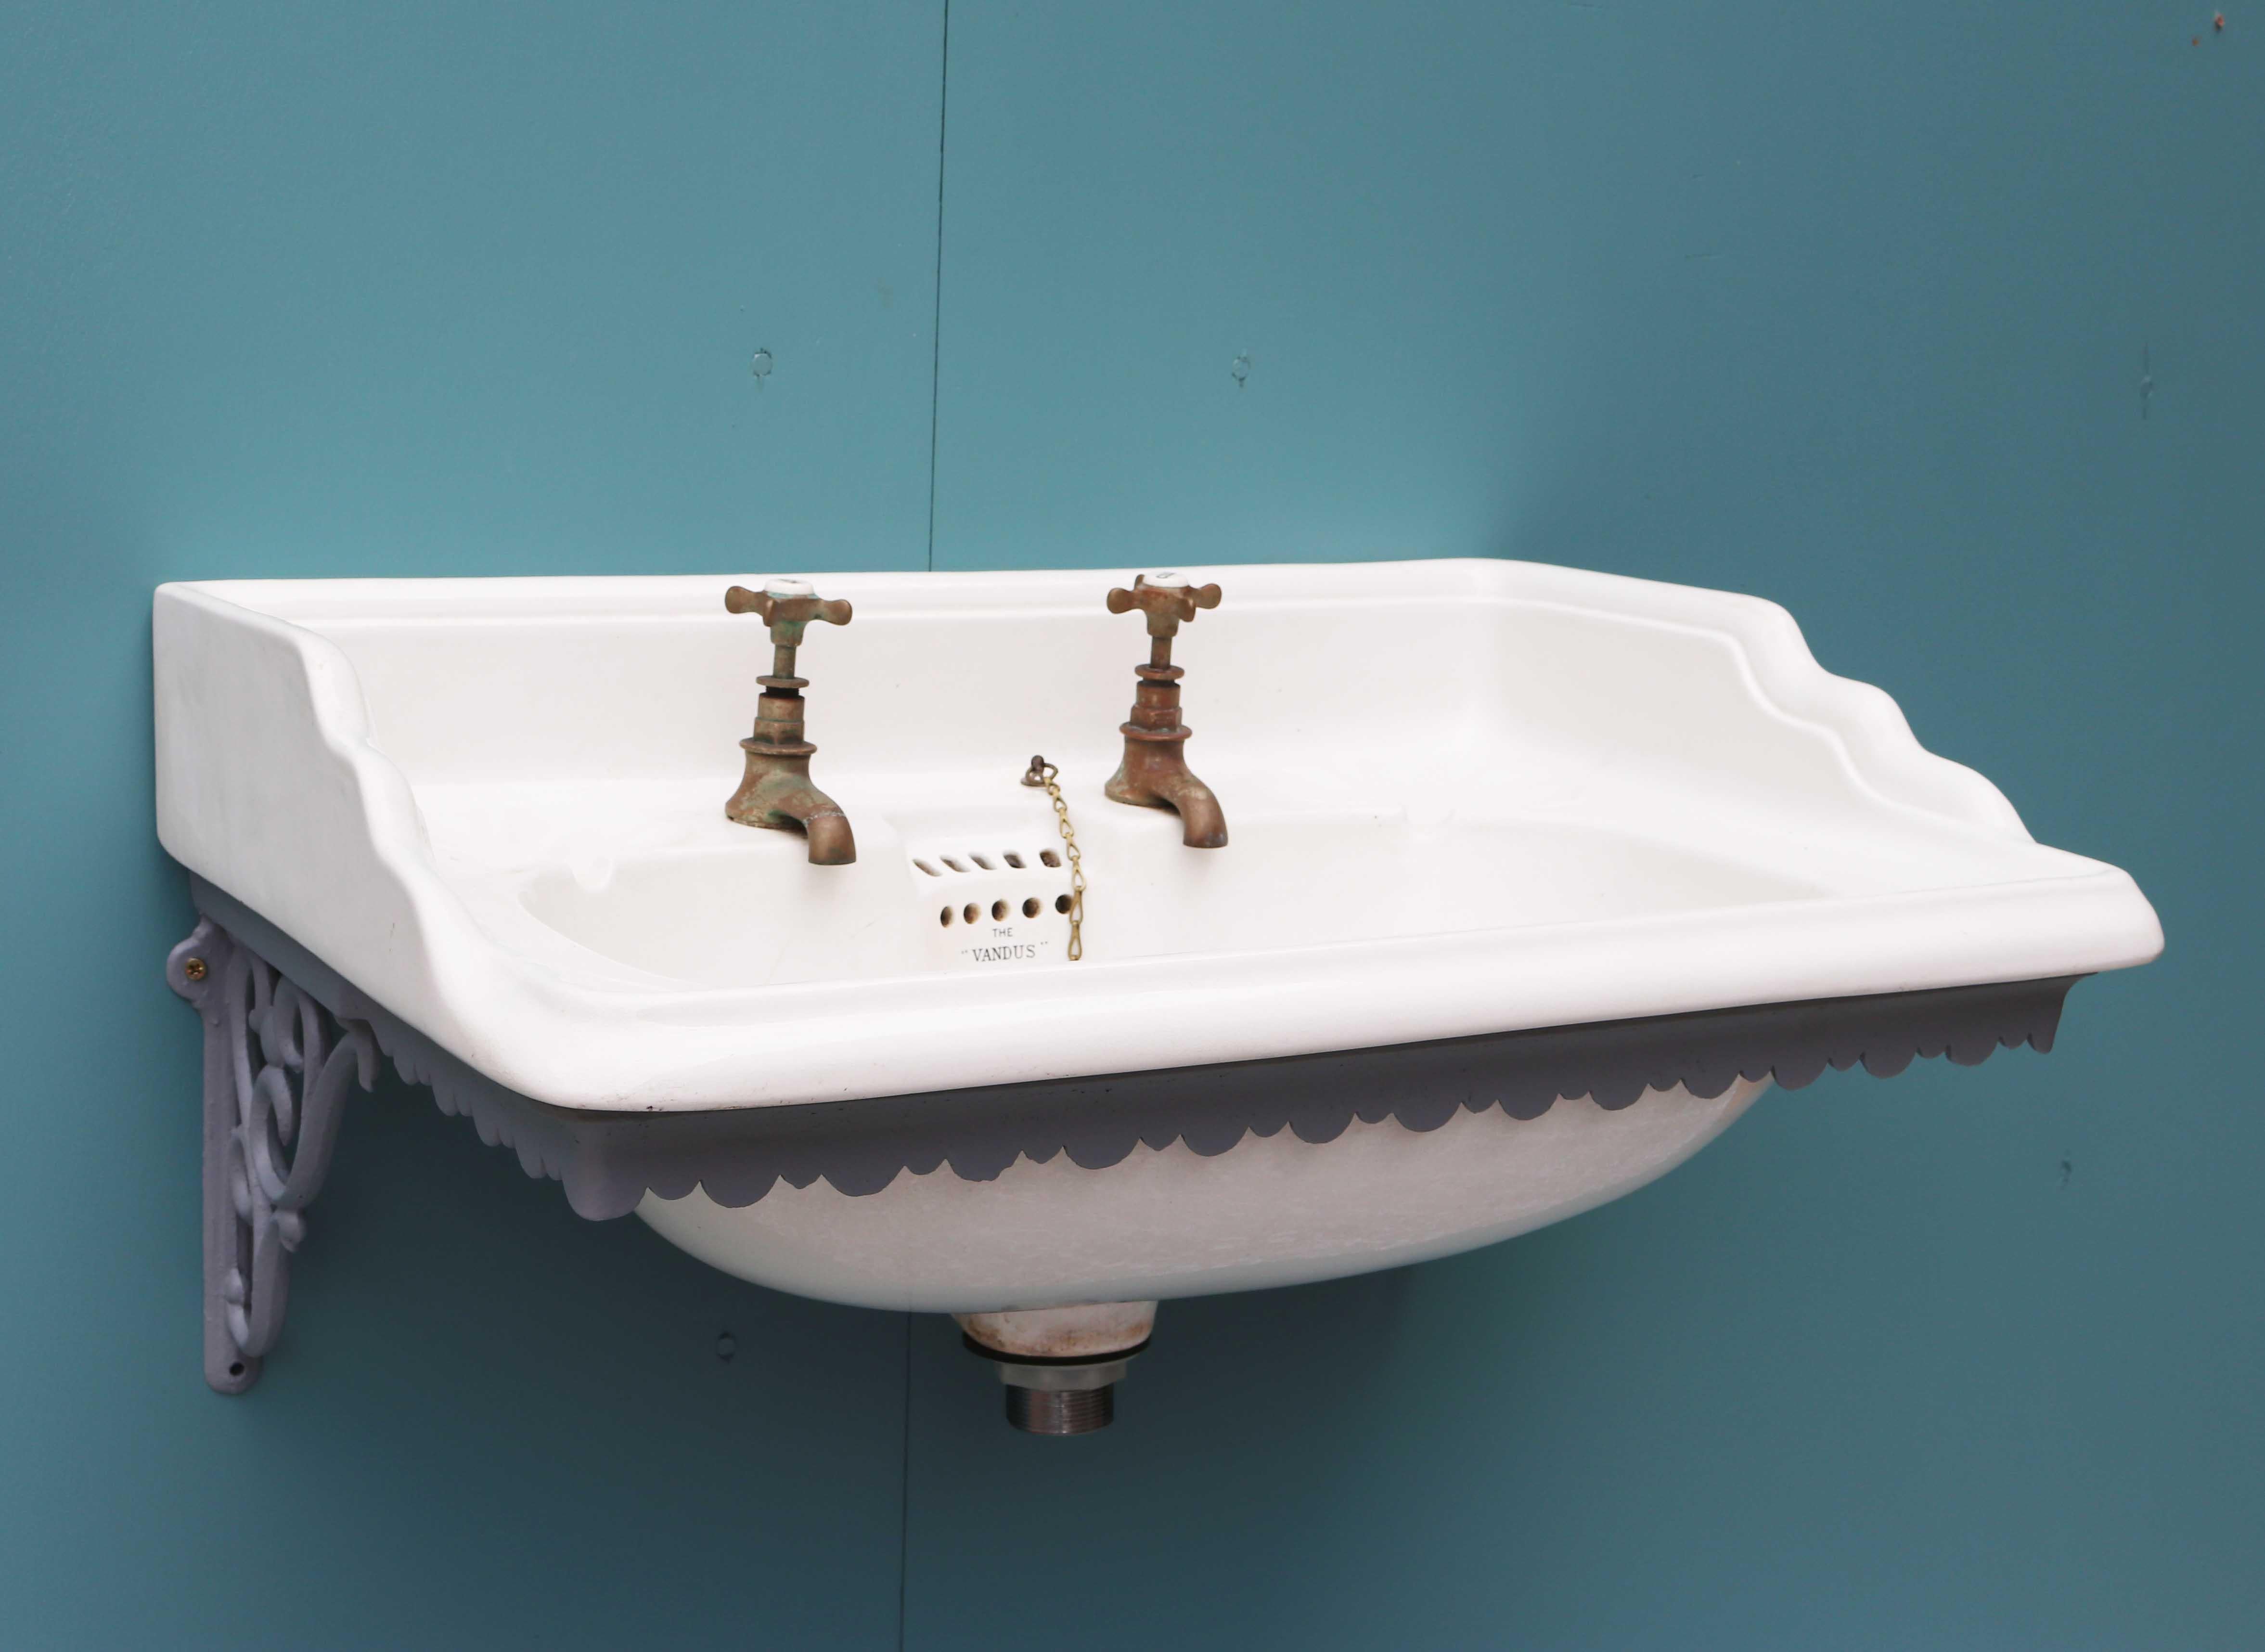 About

A Victorian wall-mounted ‘Vandus’ basin. with cast iron bracket. The basin has original taps and is fitted with a plug, chain and waste. 

Condition report

The taps turn freely, however are not tested. No chips. There are small areas